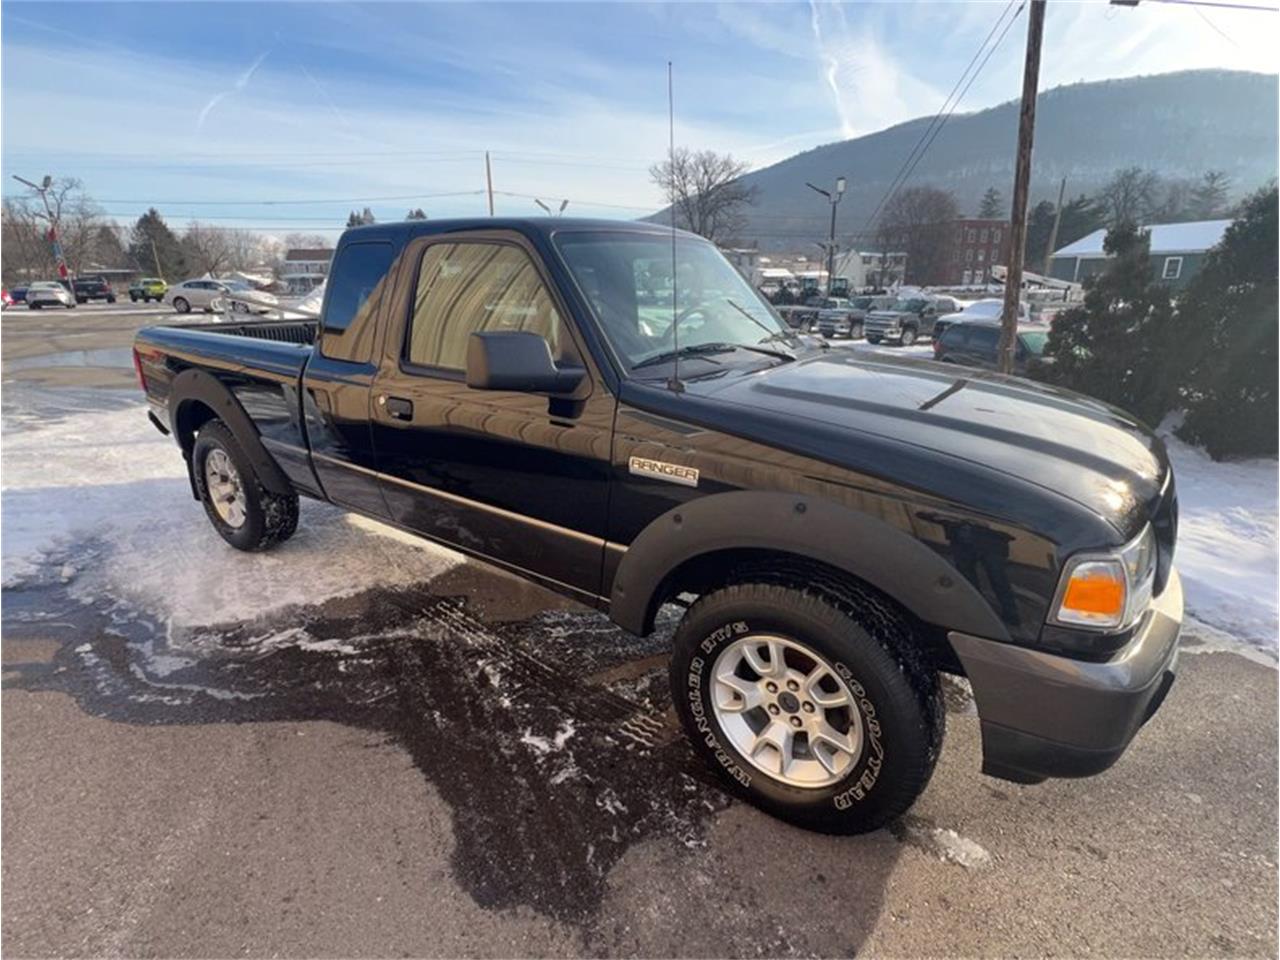 For Sale at Auction: 2008 Ford Ranger in Greensboro, North Carolina for sale in Greensboro, NC